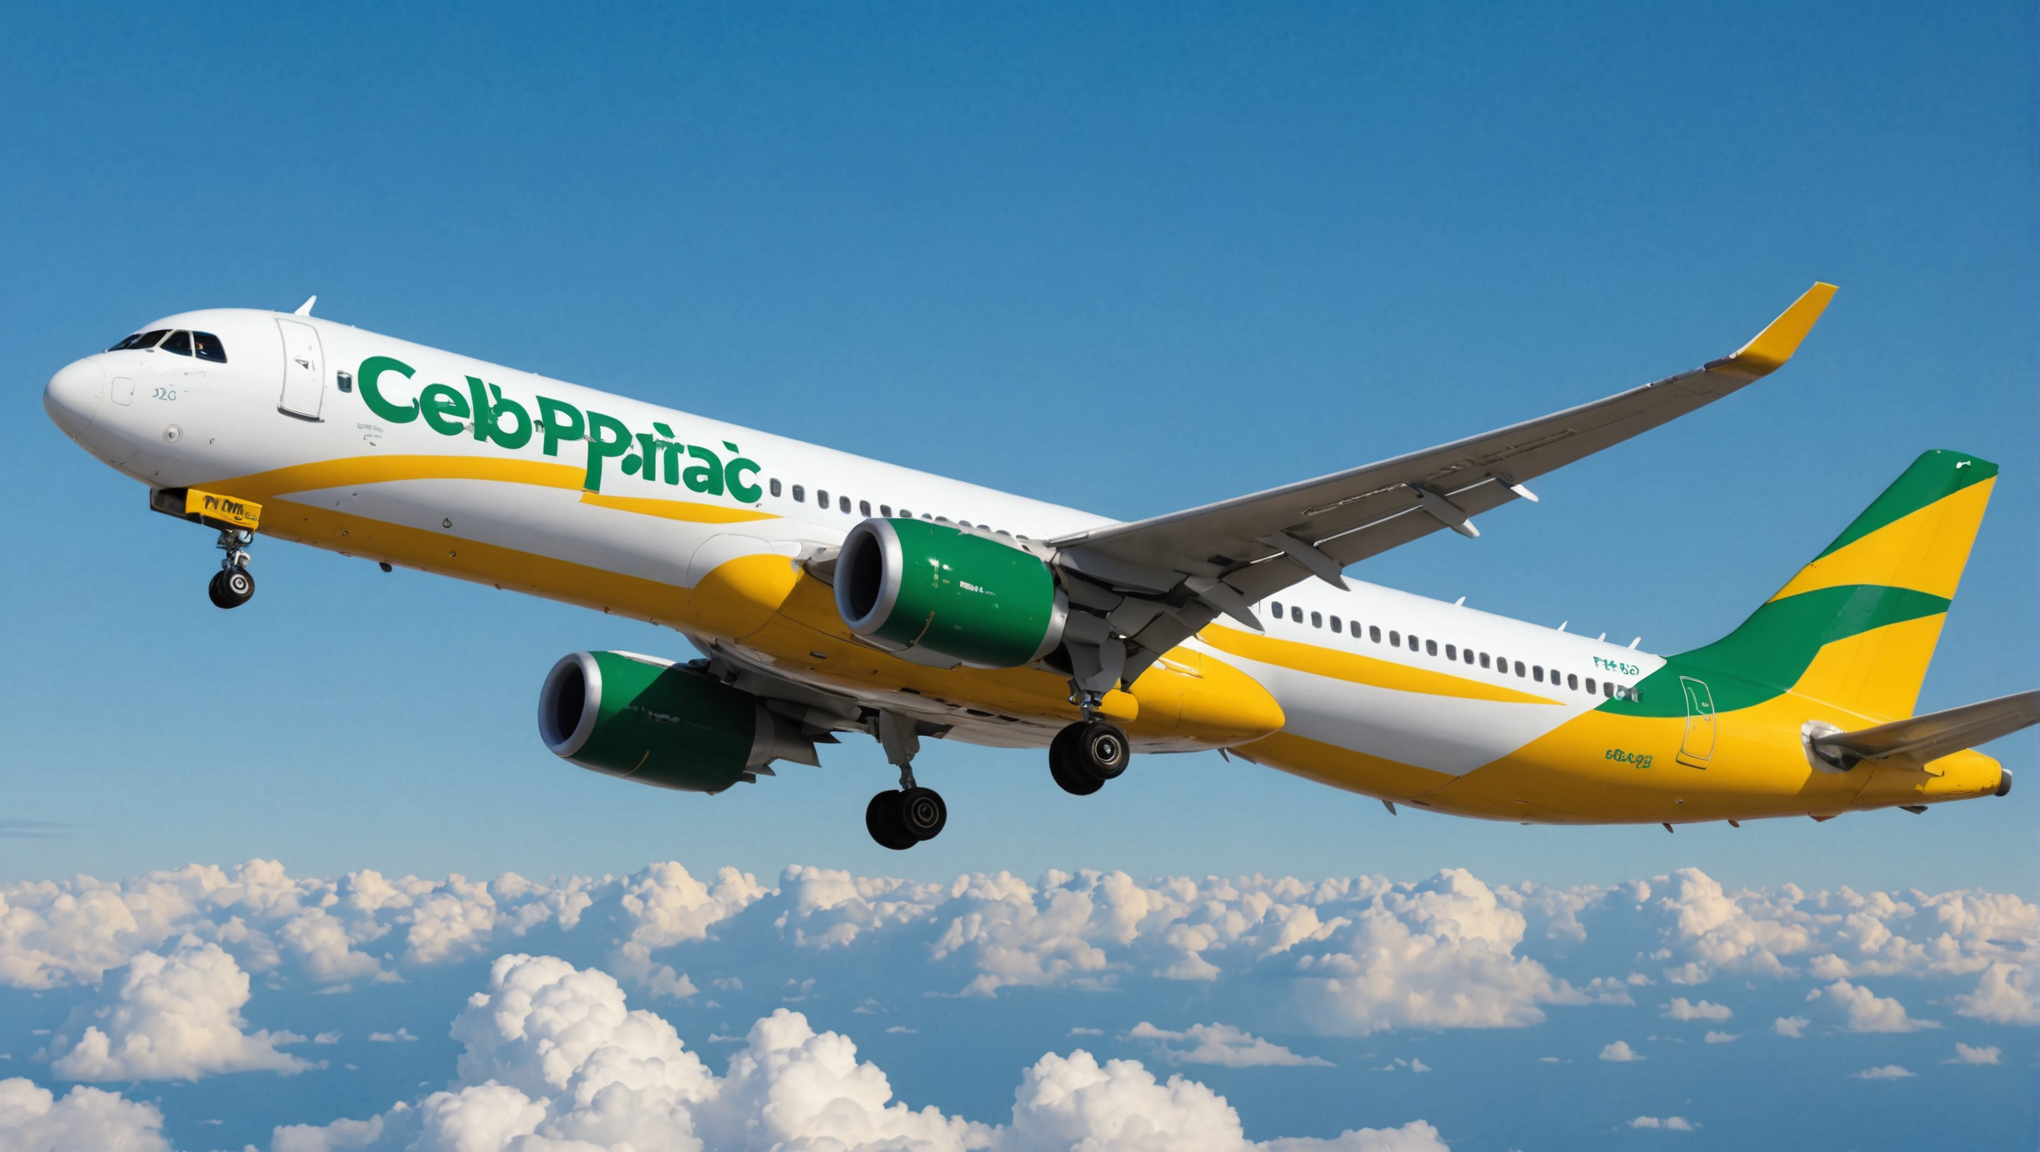 find out about cebu pacific's announcement of an order for 102 airbus a321neo and the retention of an option for 50 a320neo.